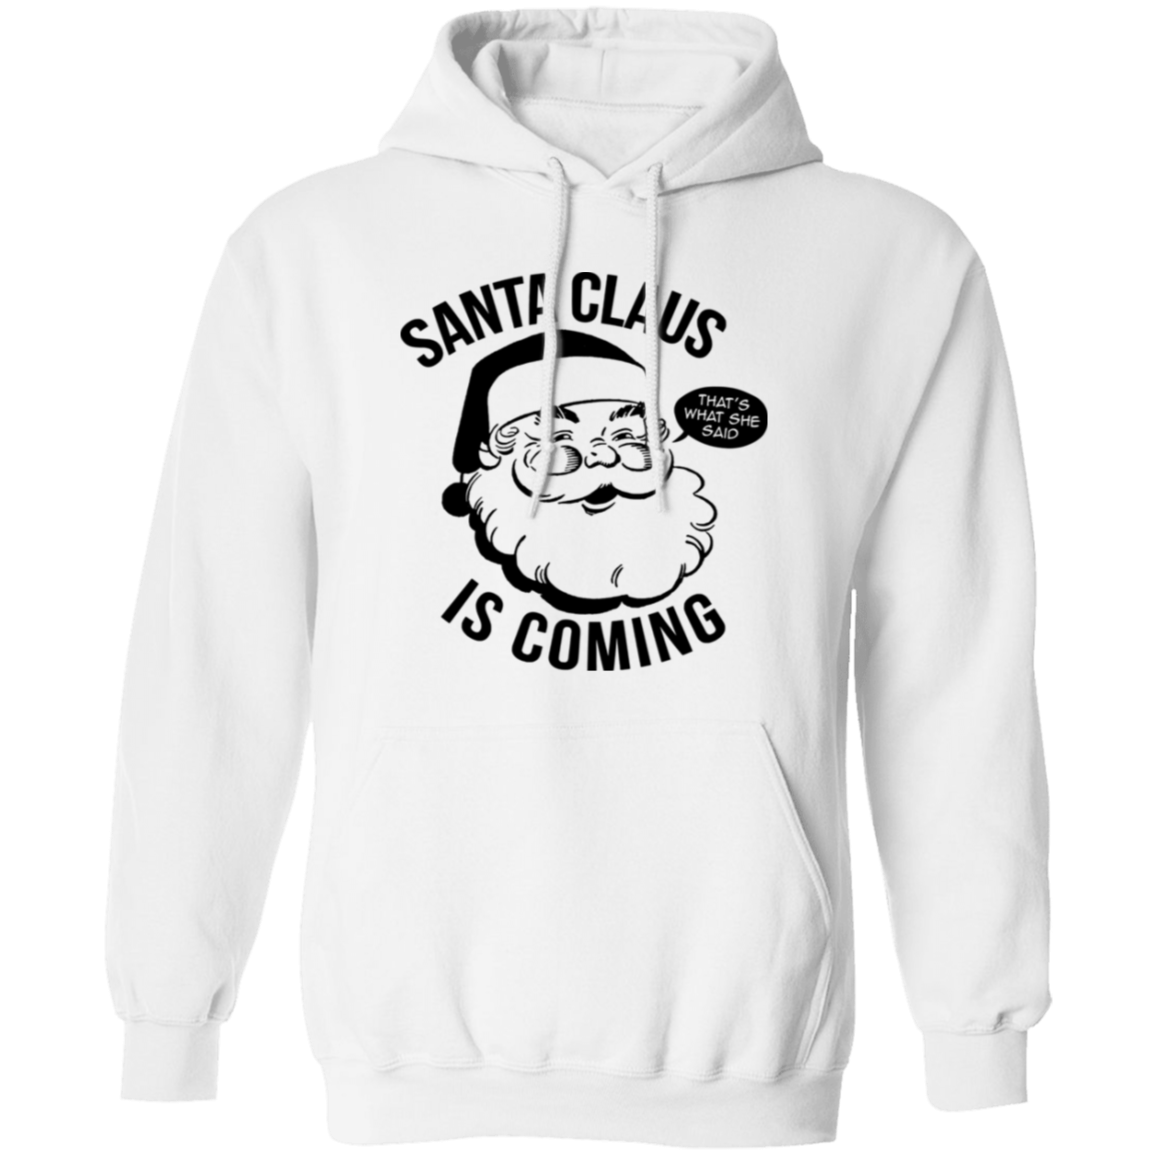 Santa Clause Is Coming G185 Pullover Hoodie